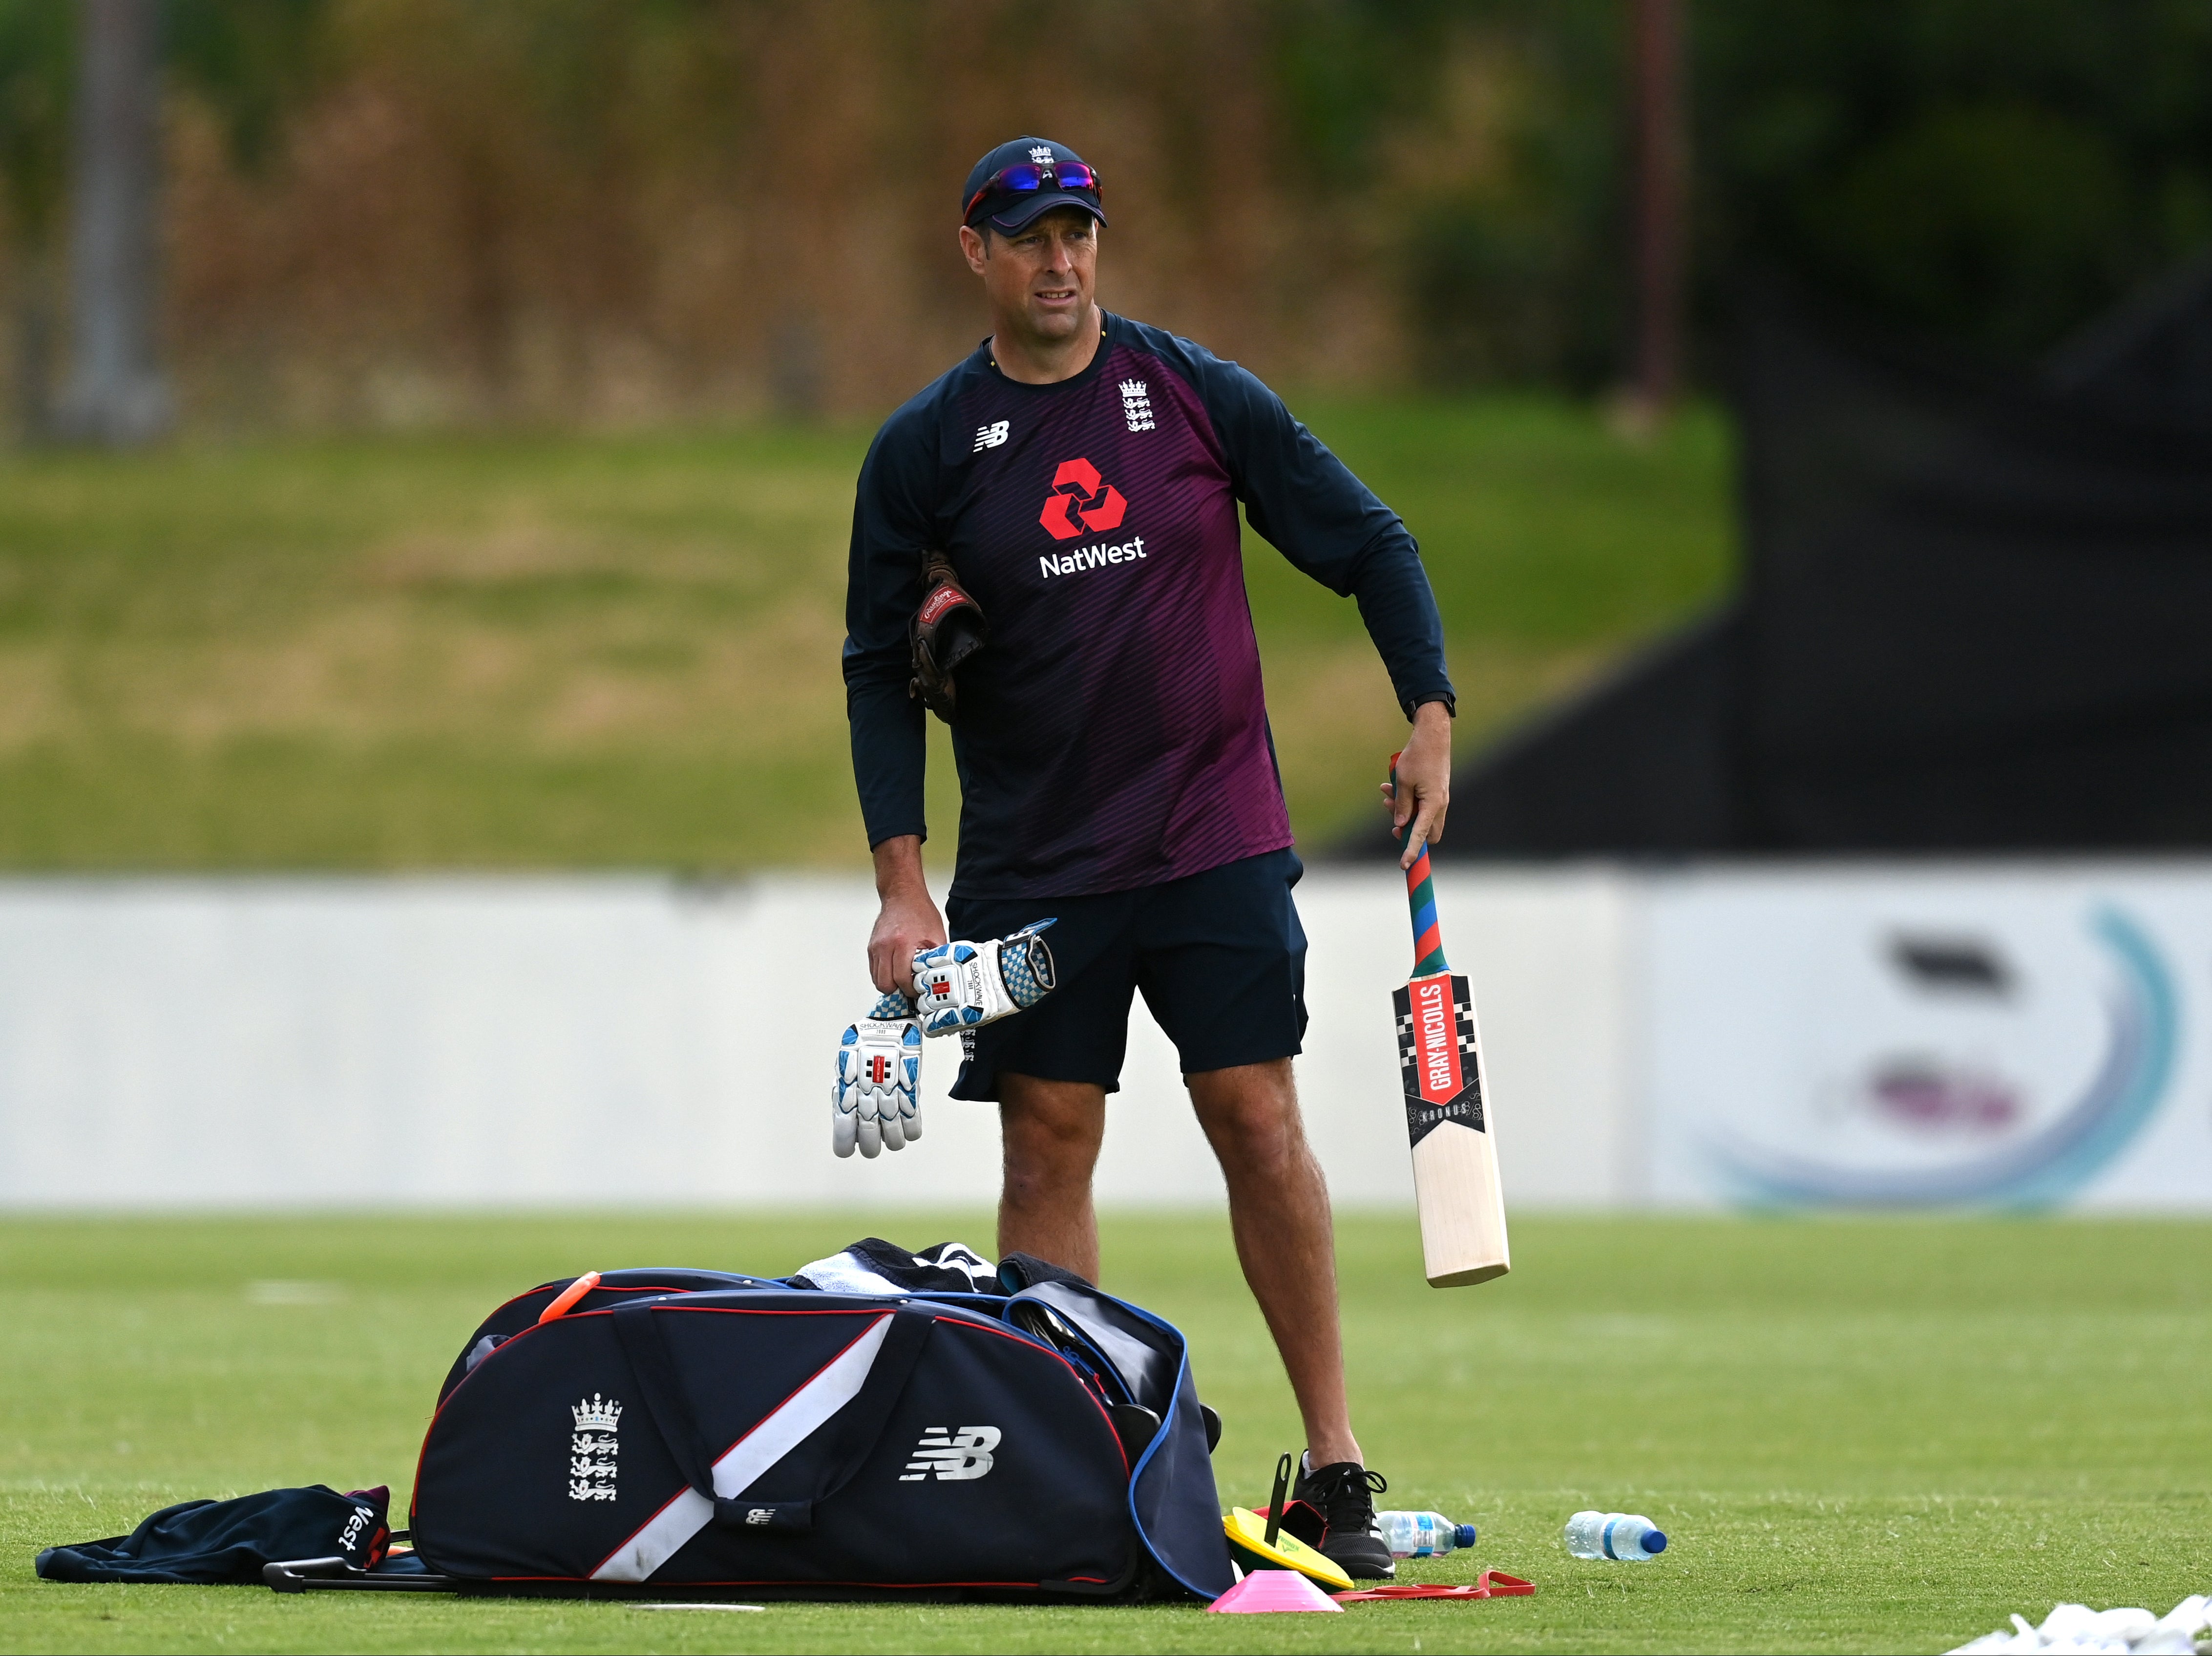 Marcus Trescothick has been appointed as England’s elite batting coach